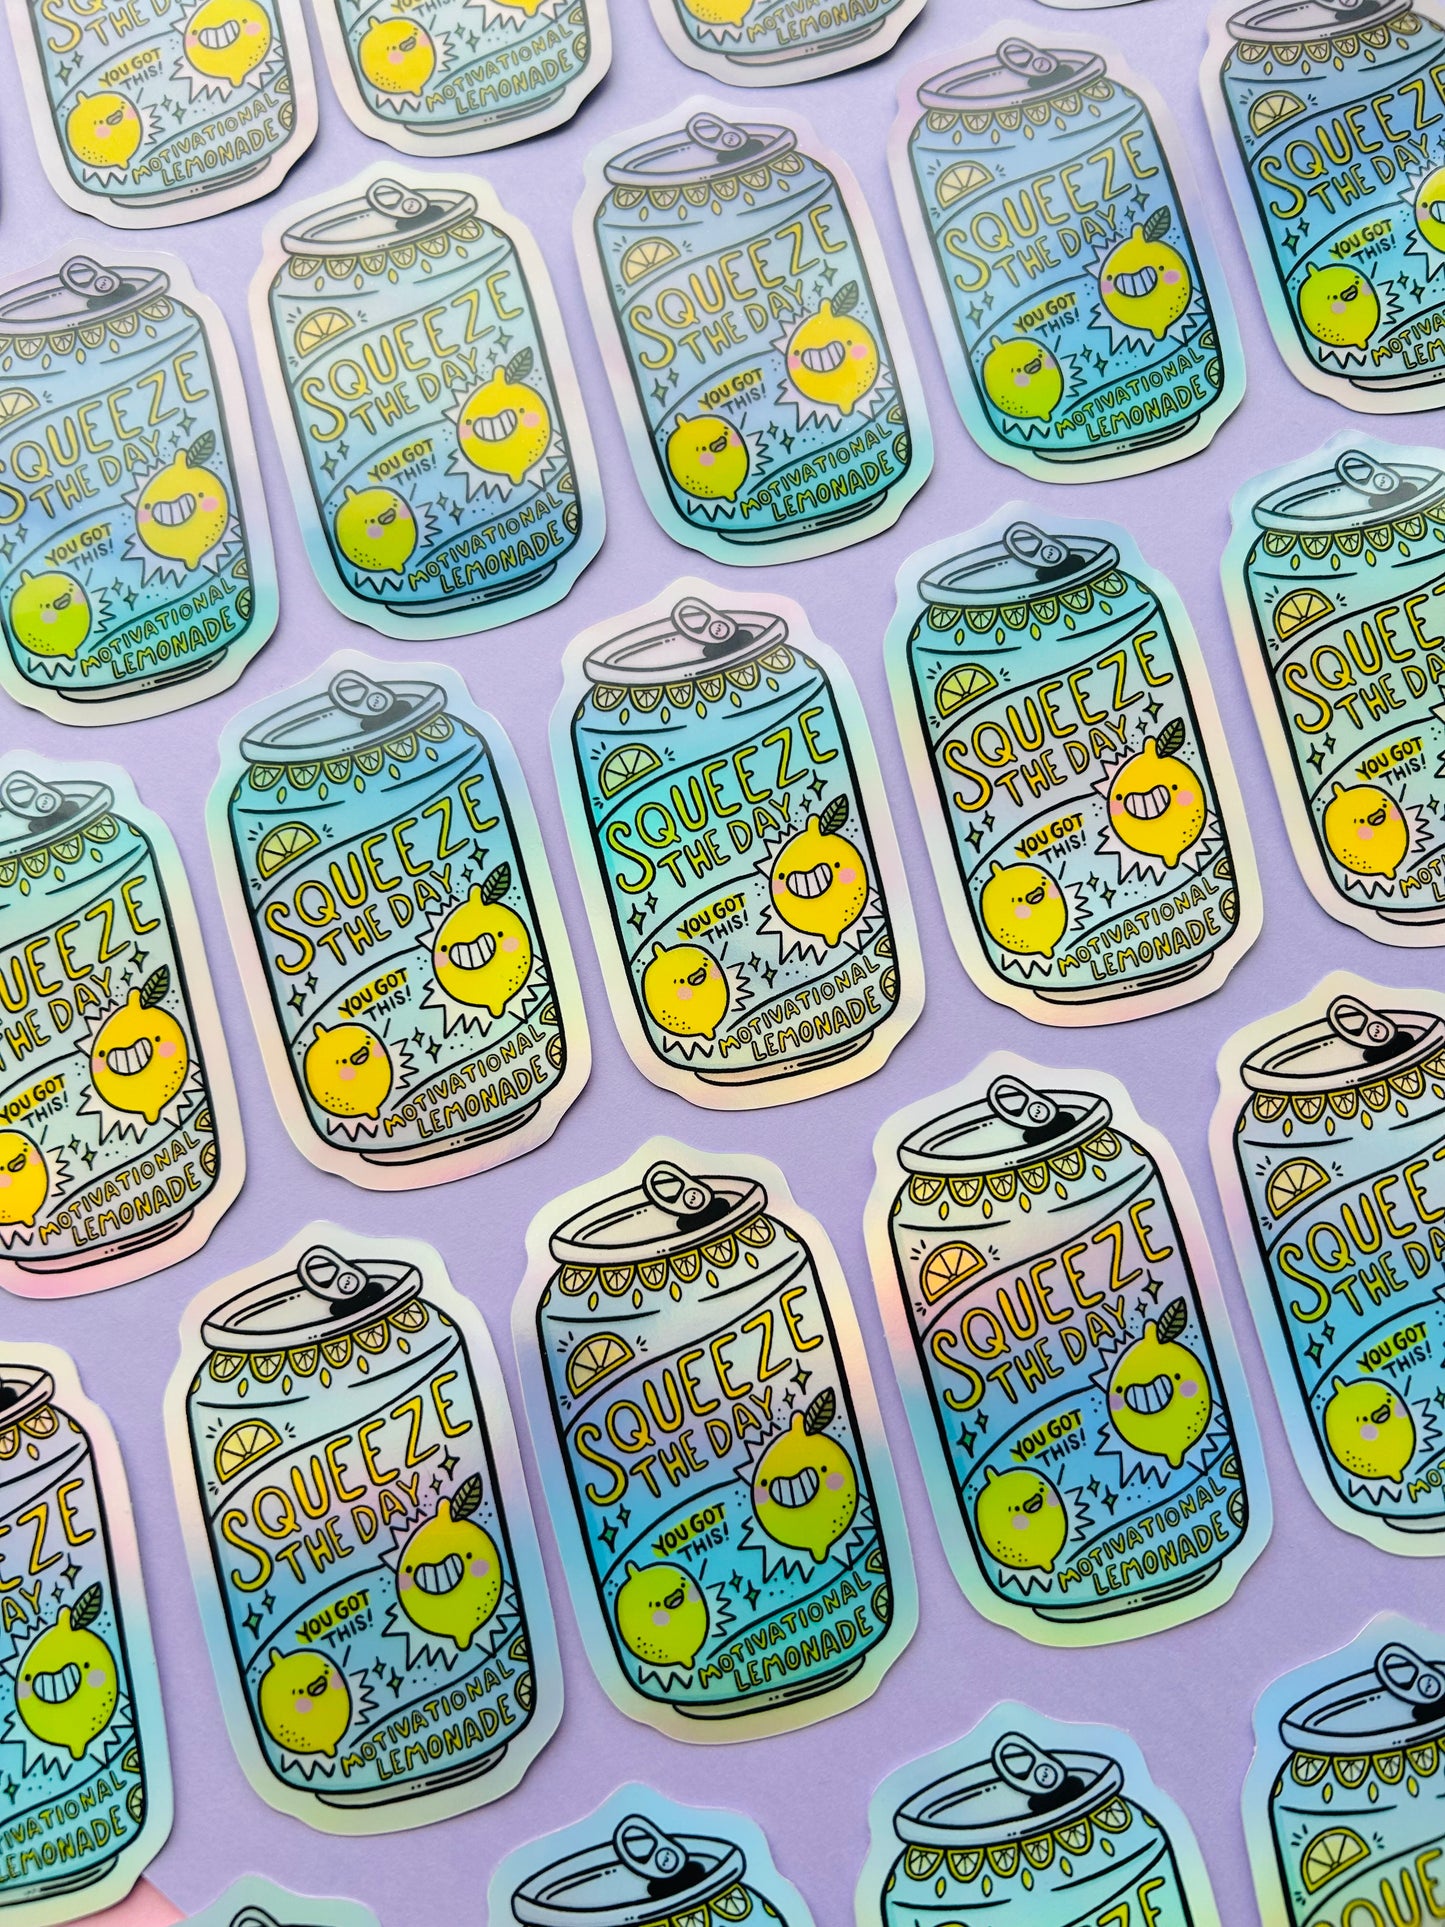 Squeeze The Day - Holographic Waterproof Sticker